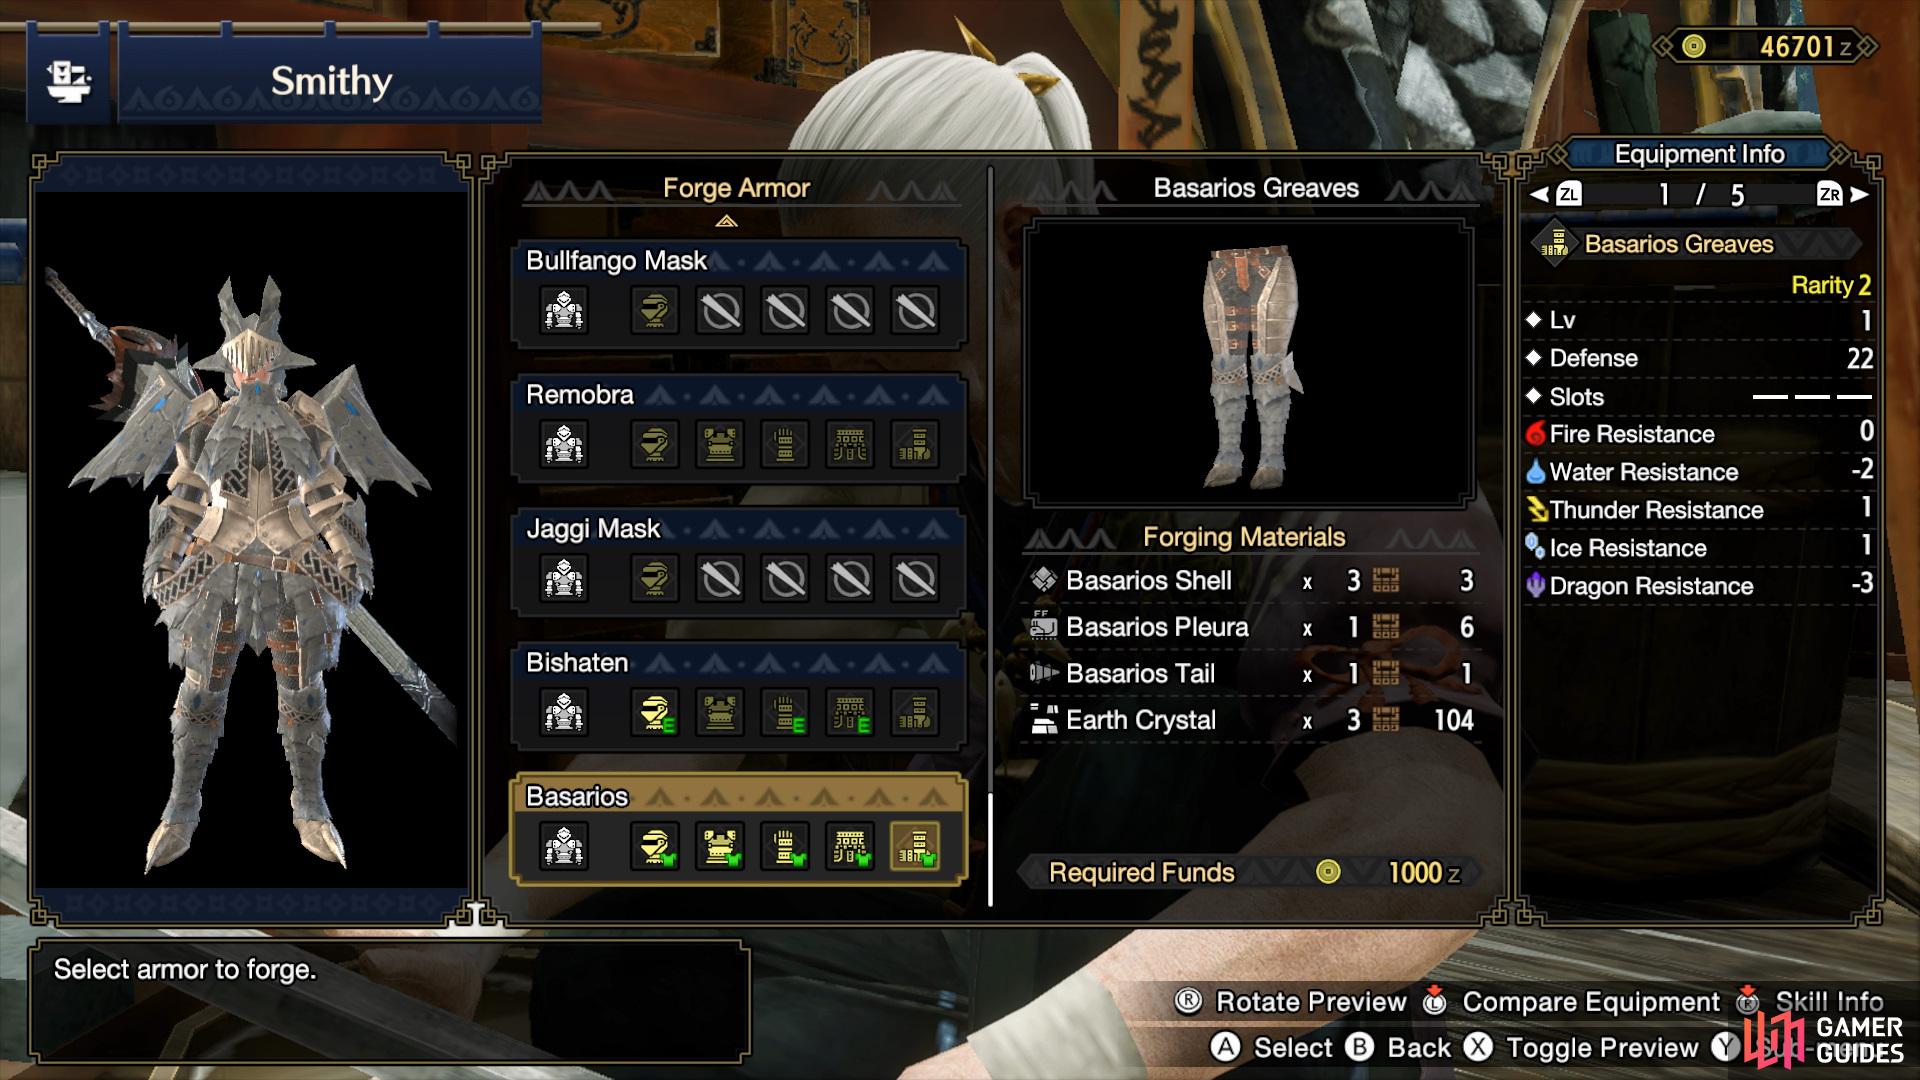 The Basarios Armor can be crafted via the Blacksmith in Kumara Village.